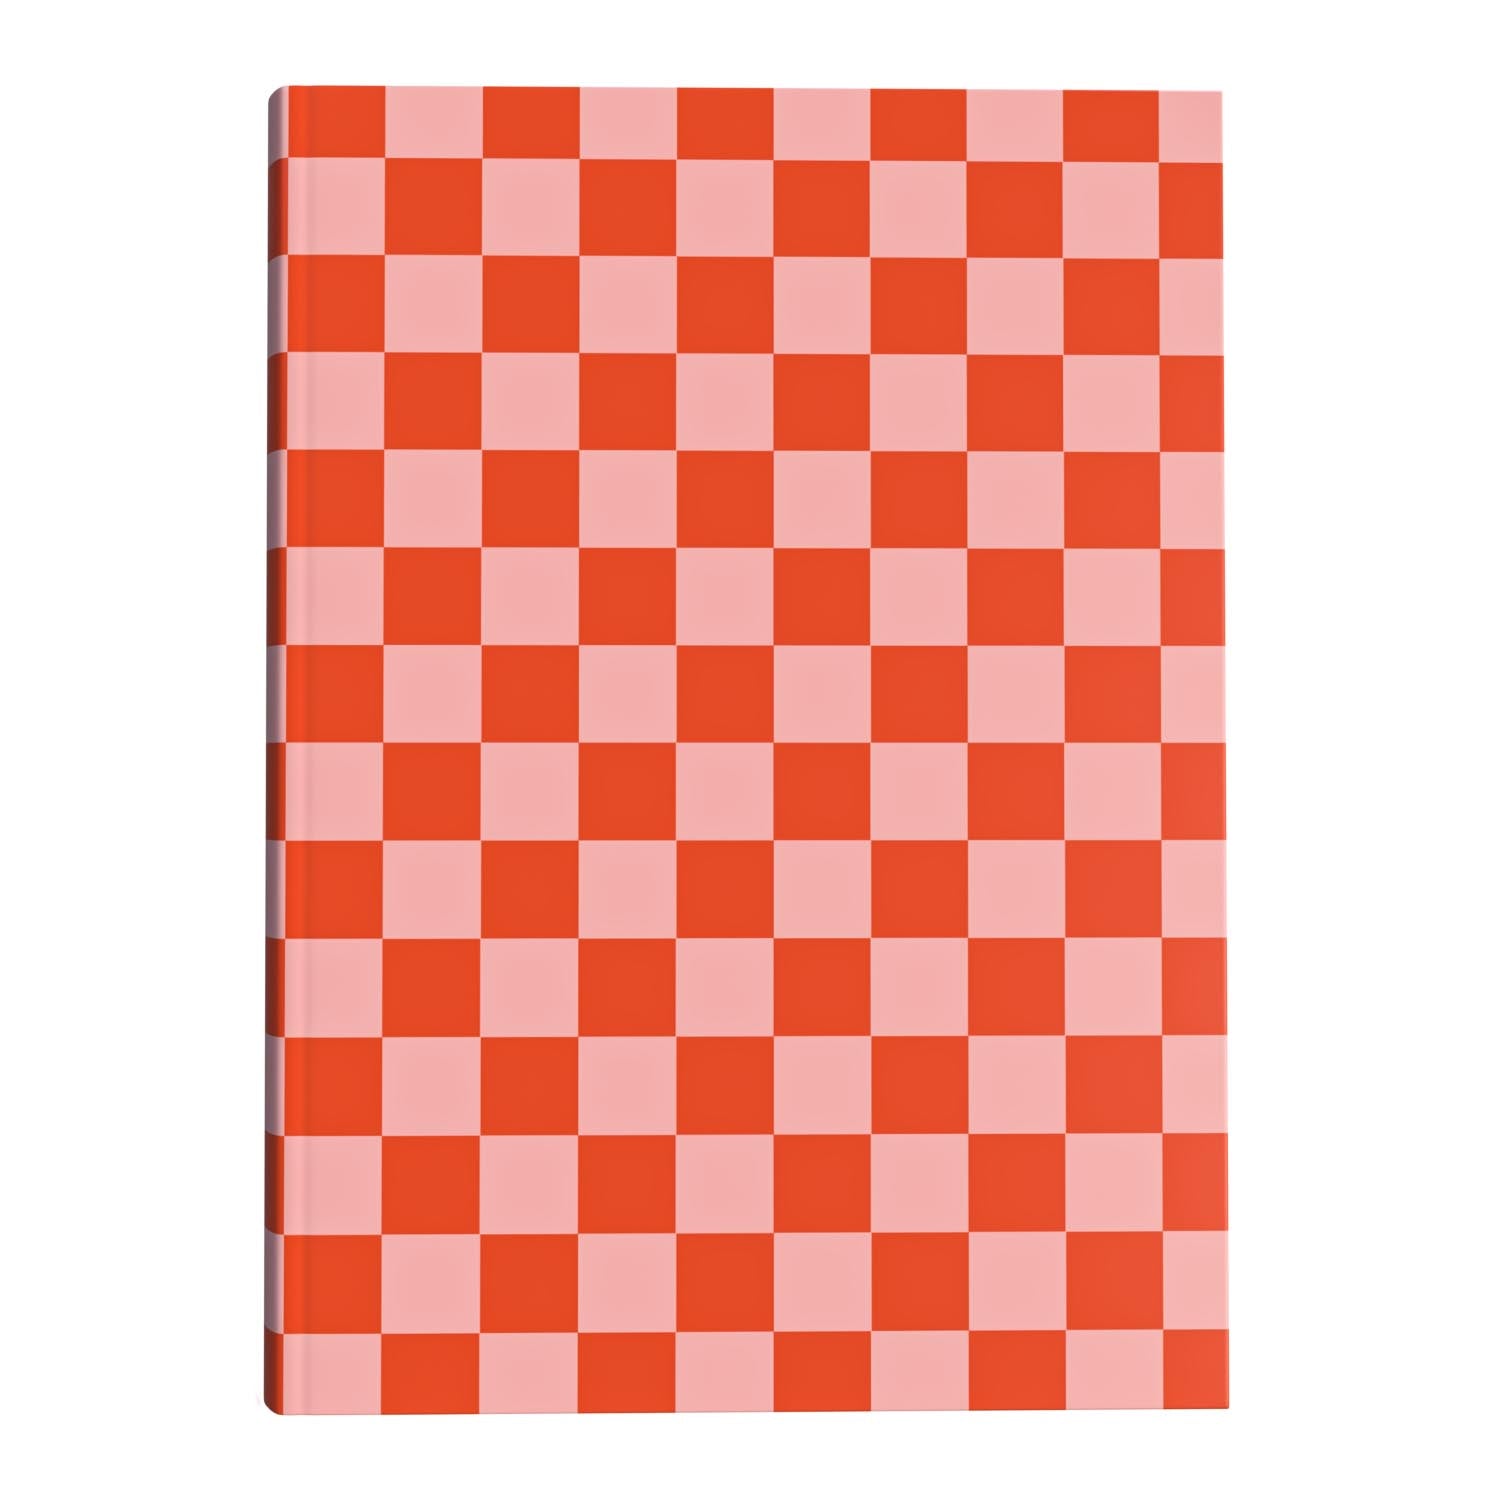 Pink Grid - A5 Paperback Notebook - Fabulous Planning - PAPER - LINED - REDGRID